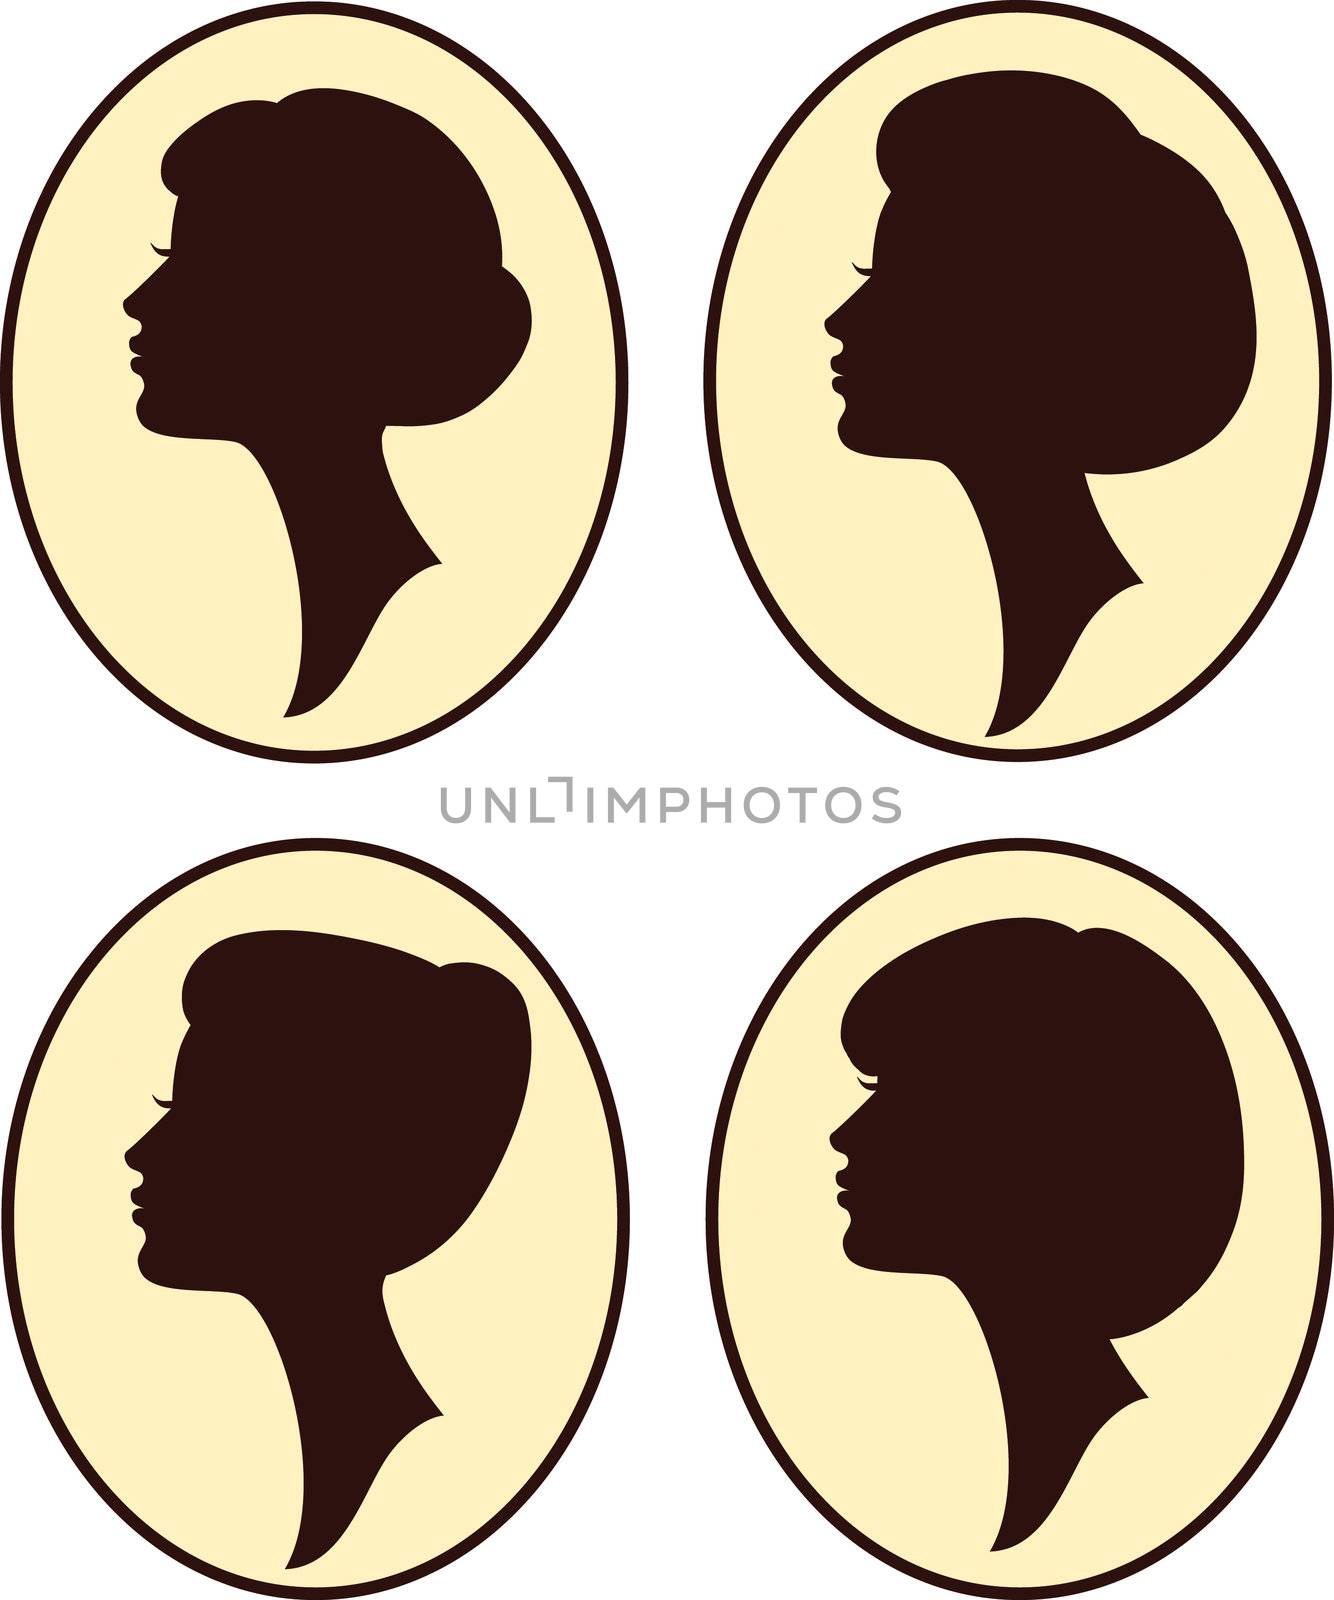 vector beautiful women and girl silhouettes with different hairstyle, set